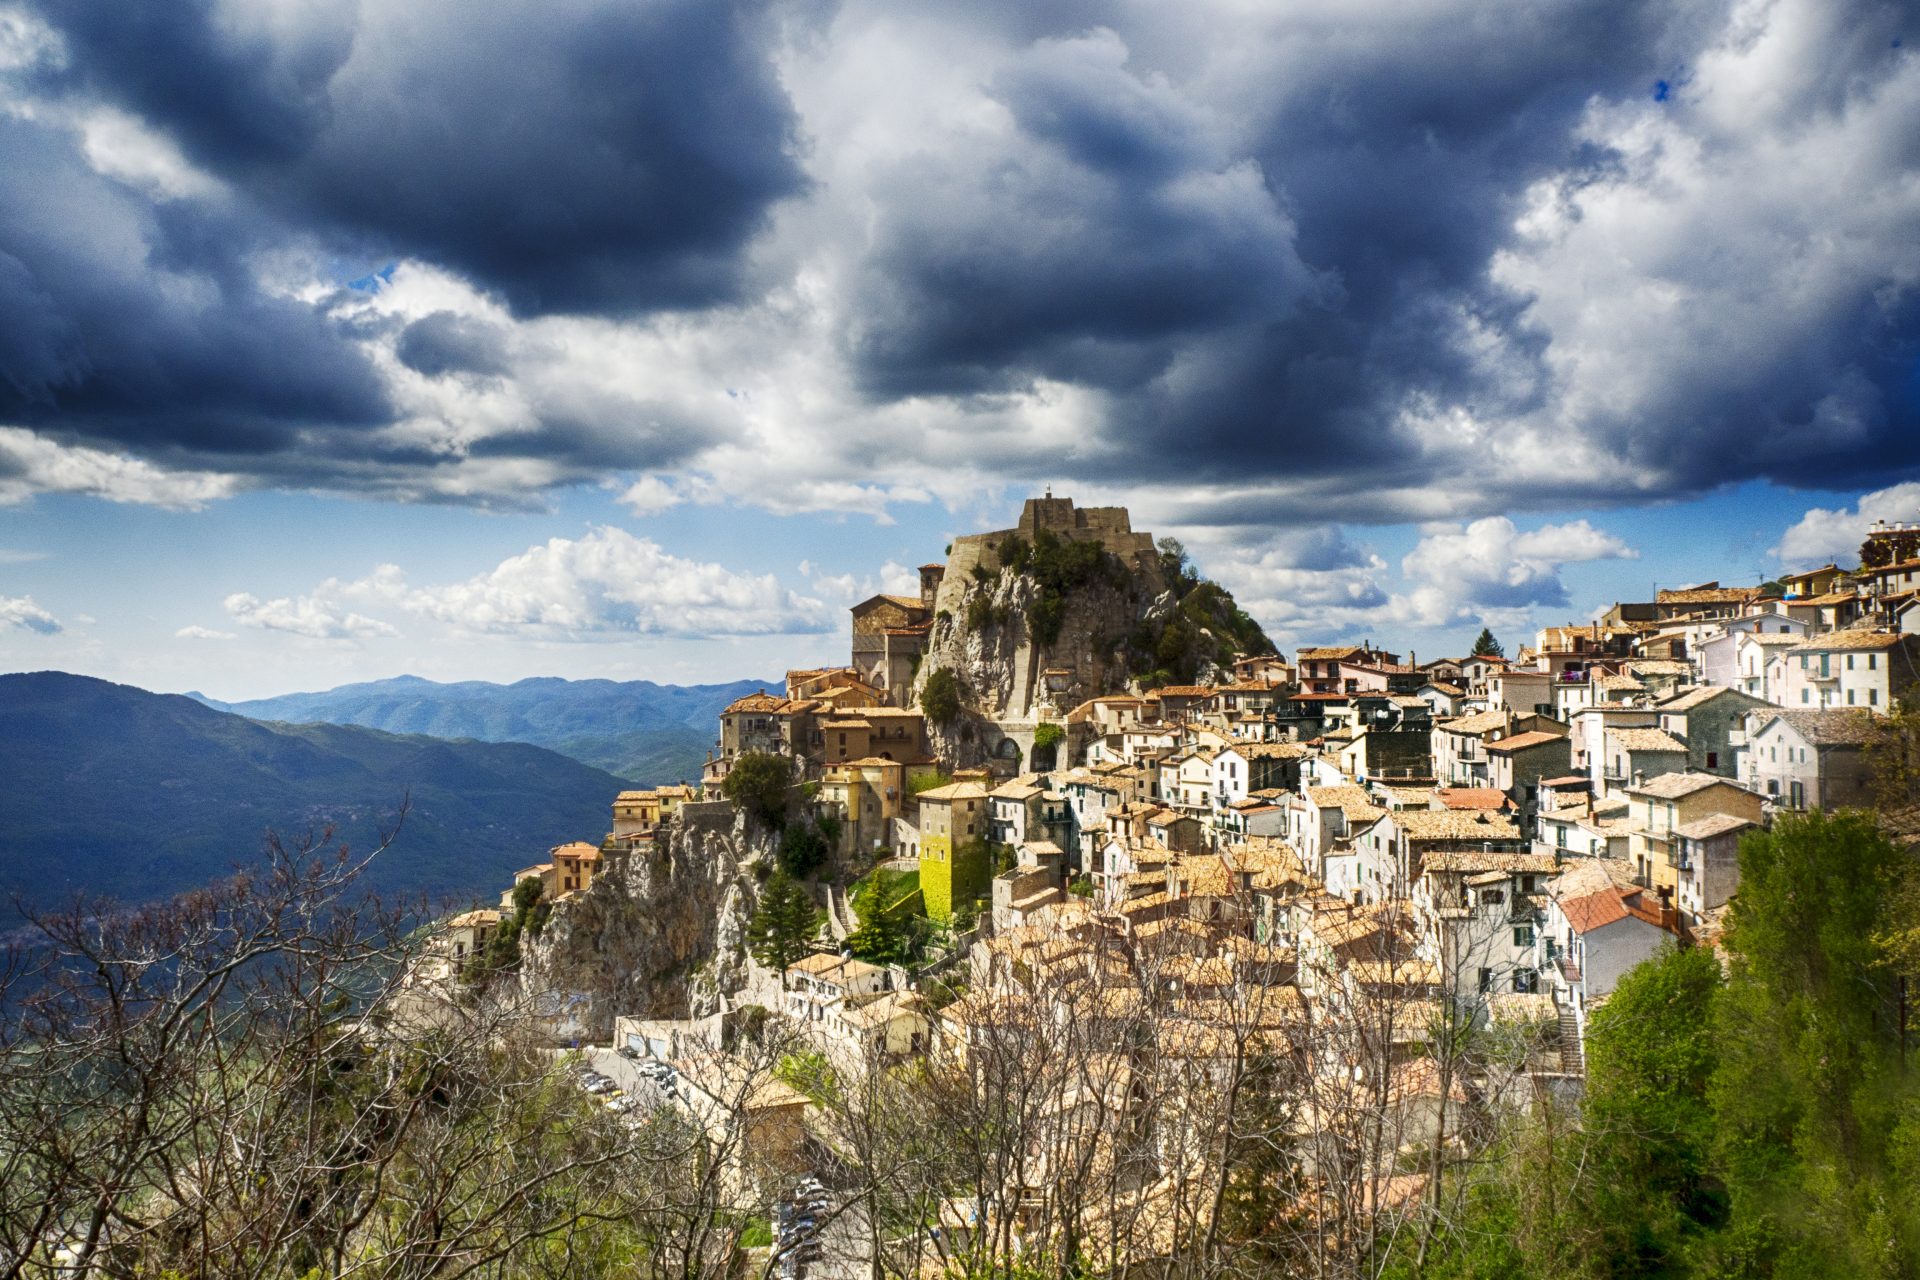 <p>With an altitude of 1050 m (3444,8 ft), Cervara is the second-highest municipality in the province of Rome. It is, therefore, no surprise that it has some of the most breathtaking views in the area. The Scalinata Degli Artisti is an evocative path among the suggestive stone houses of the village and a tribute to the numerous artists who chose Cervara di Roma as their muse in the 19th century. On the walls of the staircase one can find the town's homage to Ennio Morricone, its honorary citizen.</p>